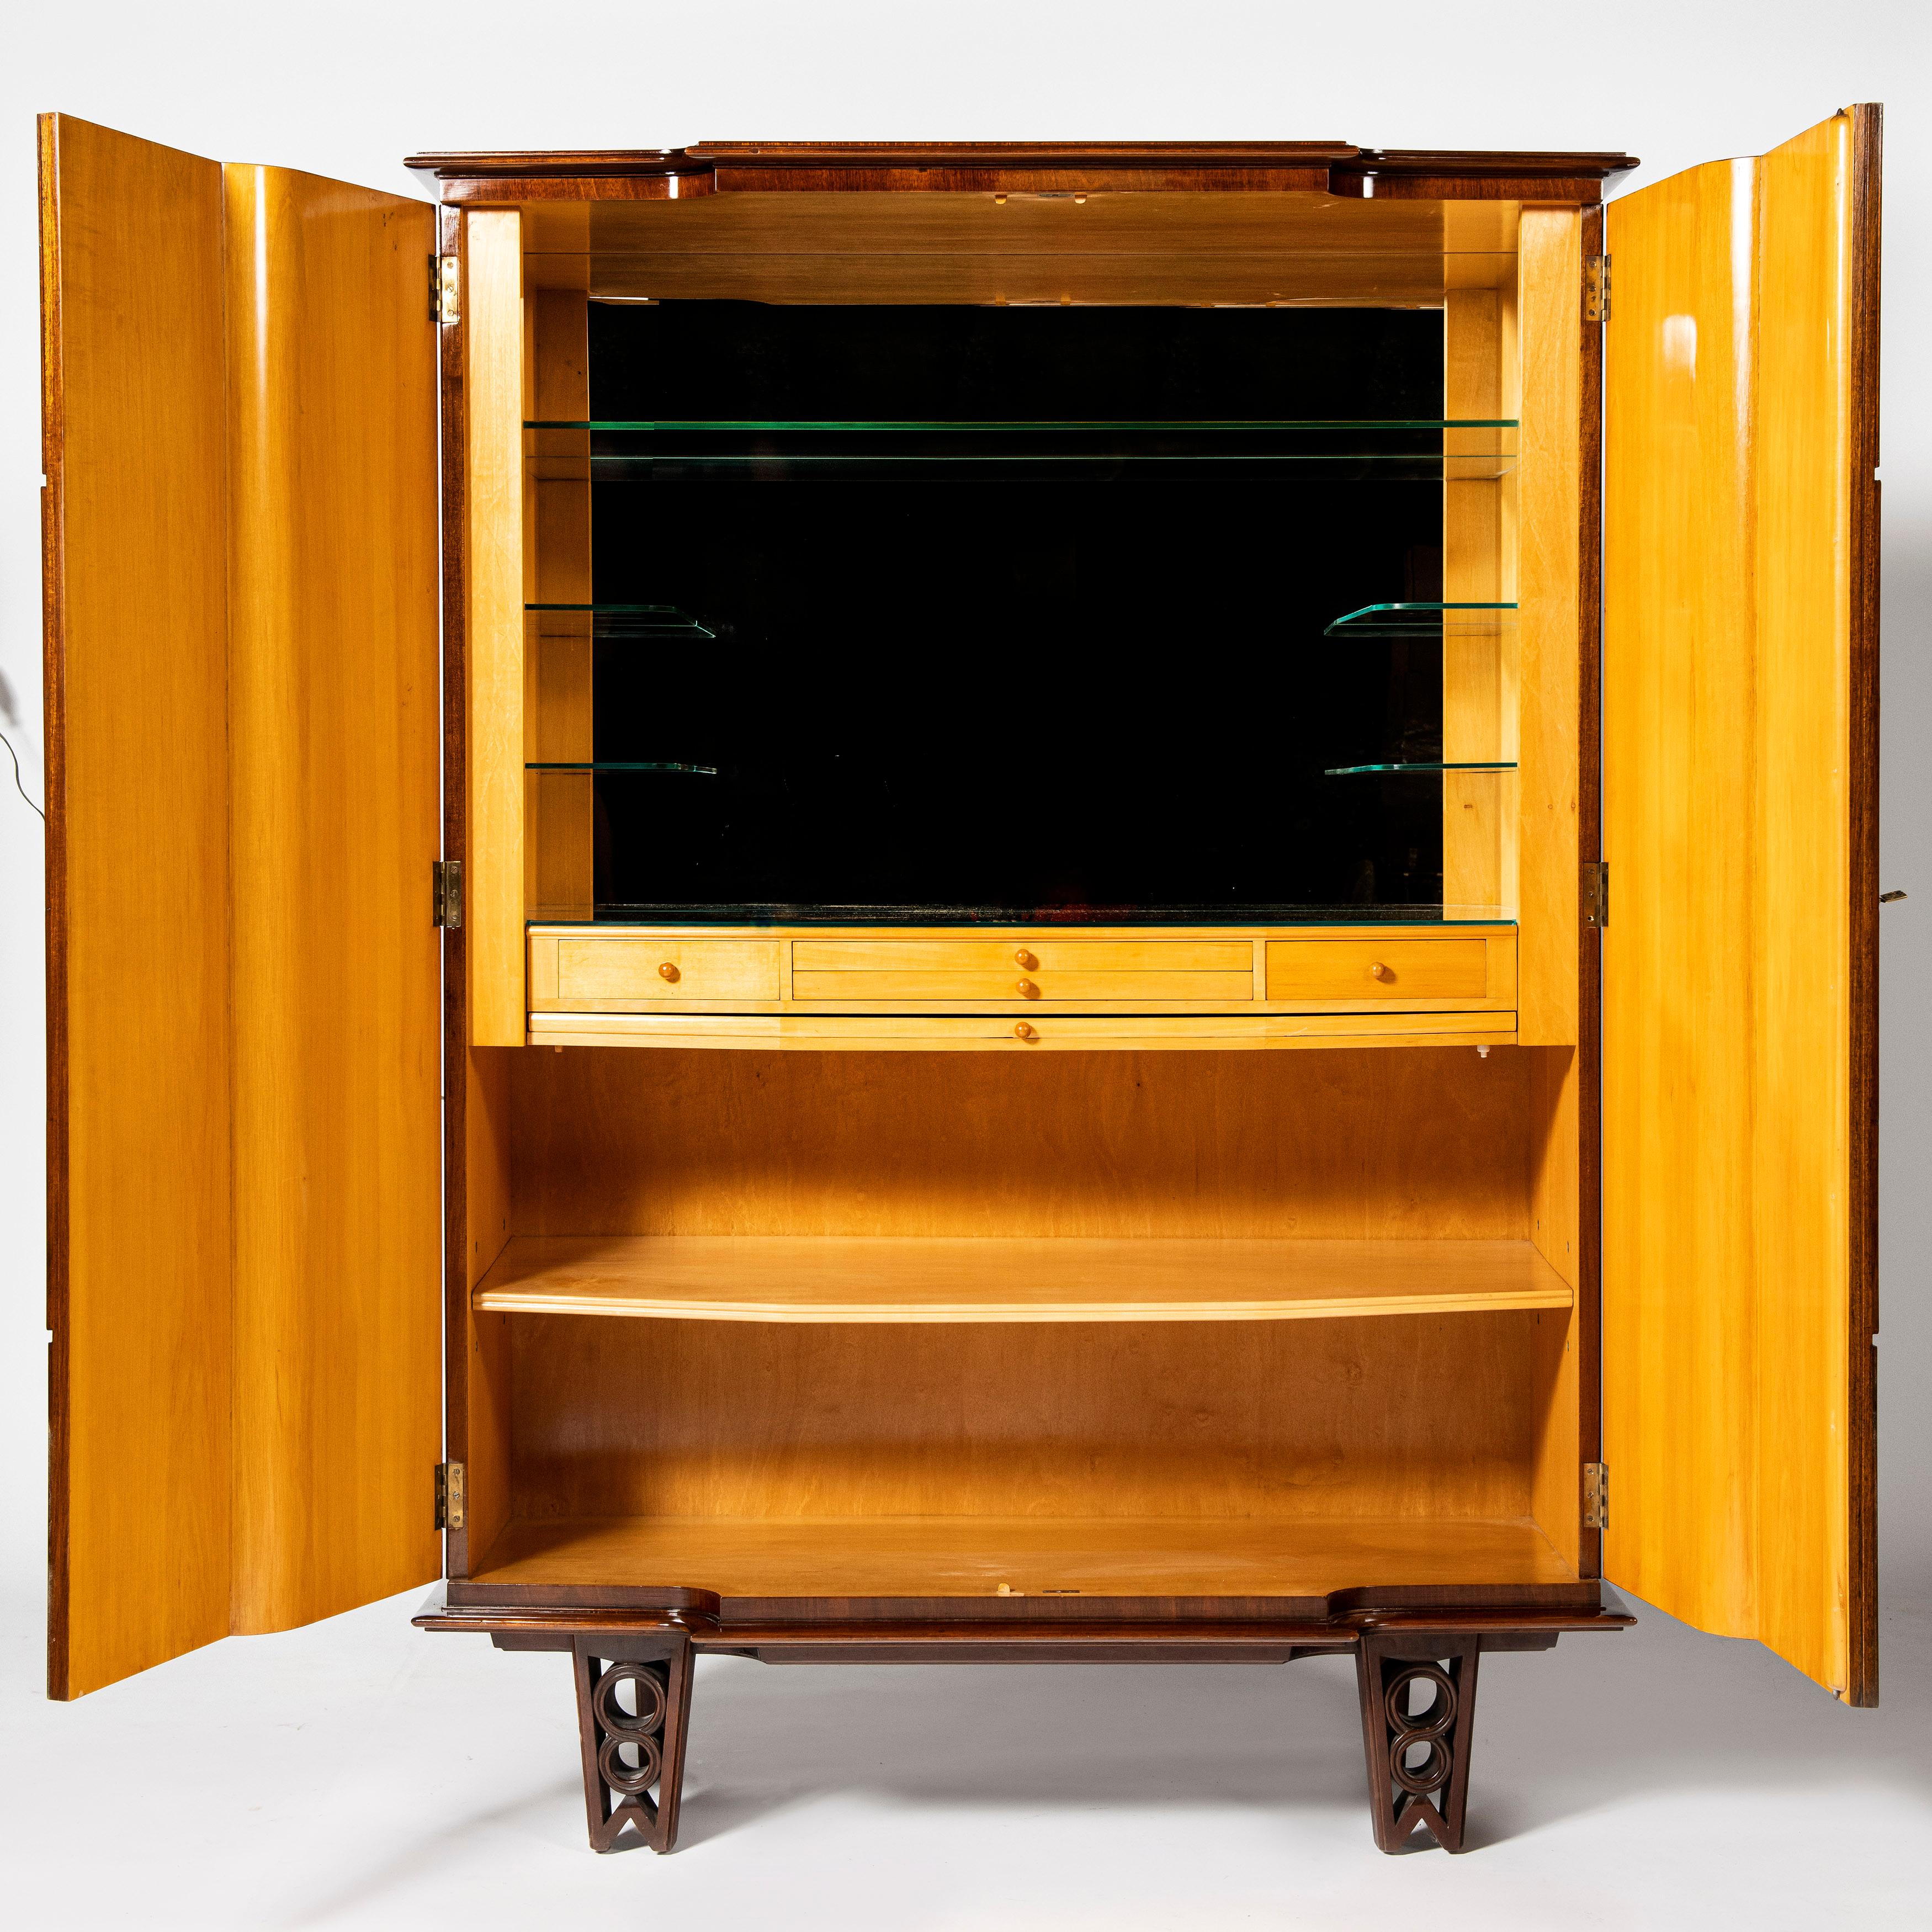 Wood bar by Englander & Bonta, Argentina, Buenos Aires, circa 1950.
With glass and mirror inside.